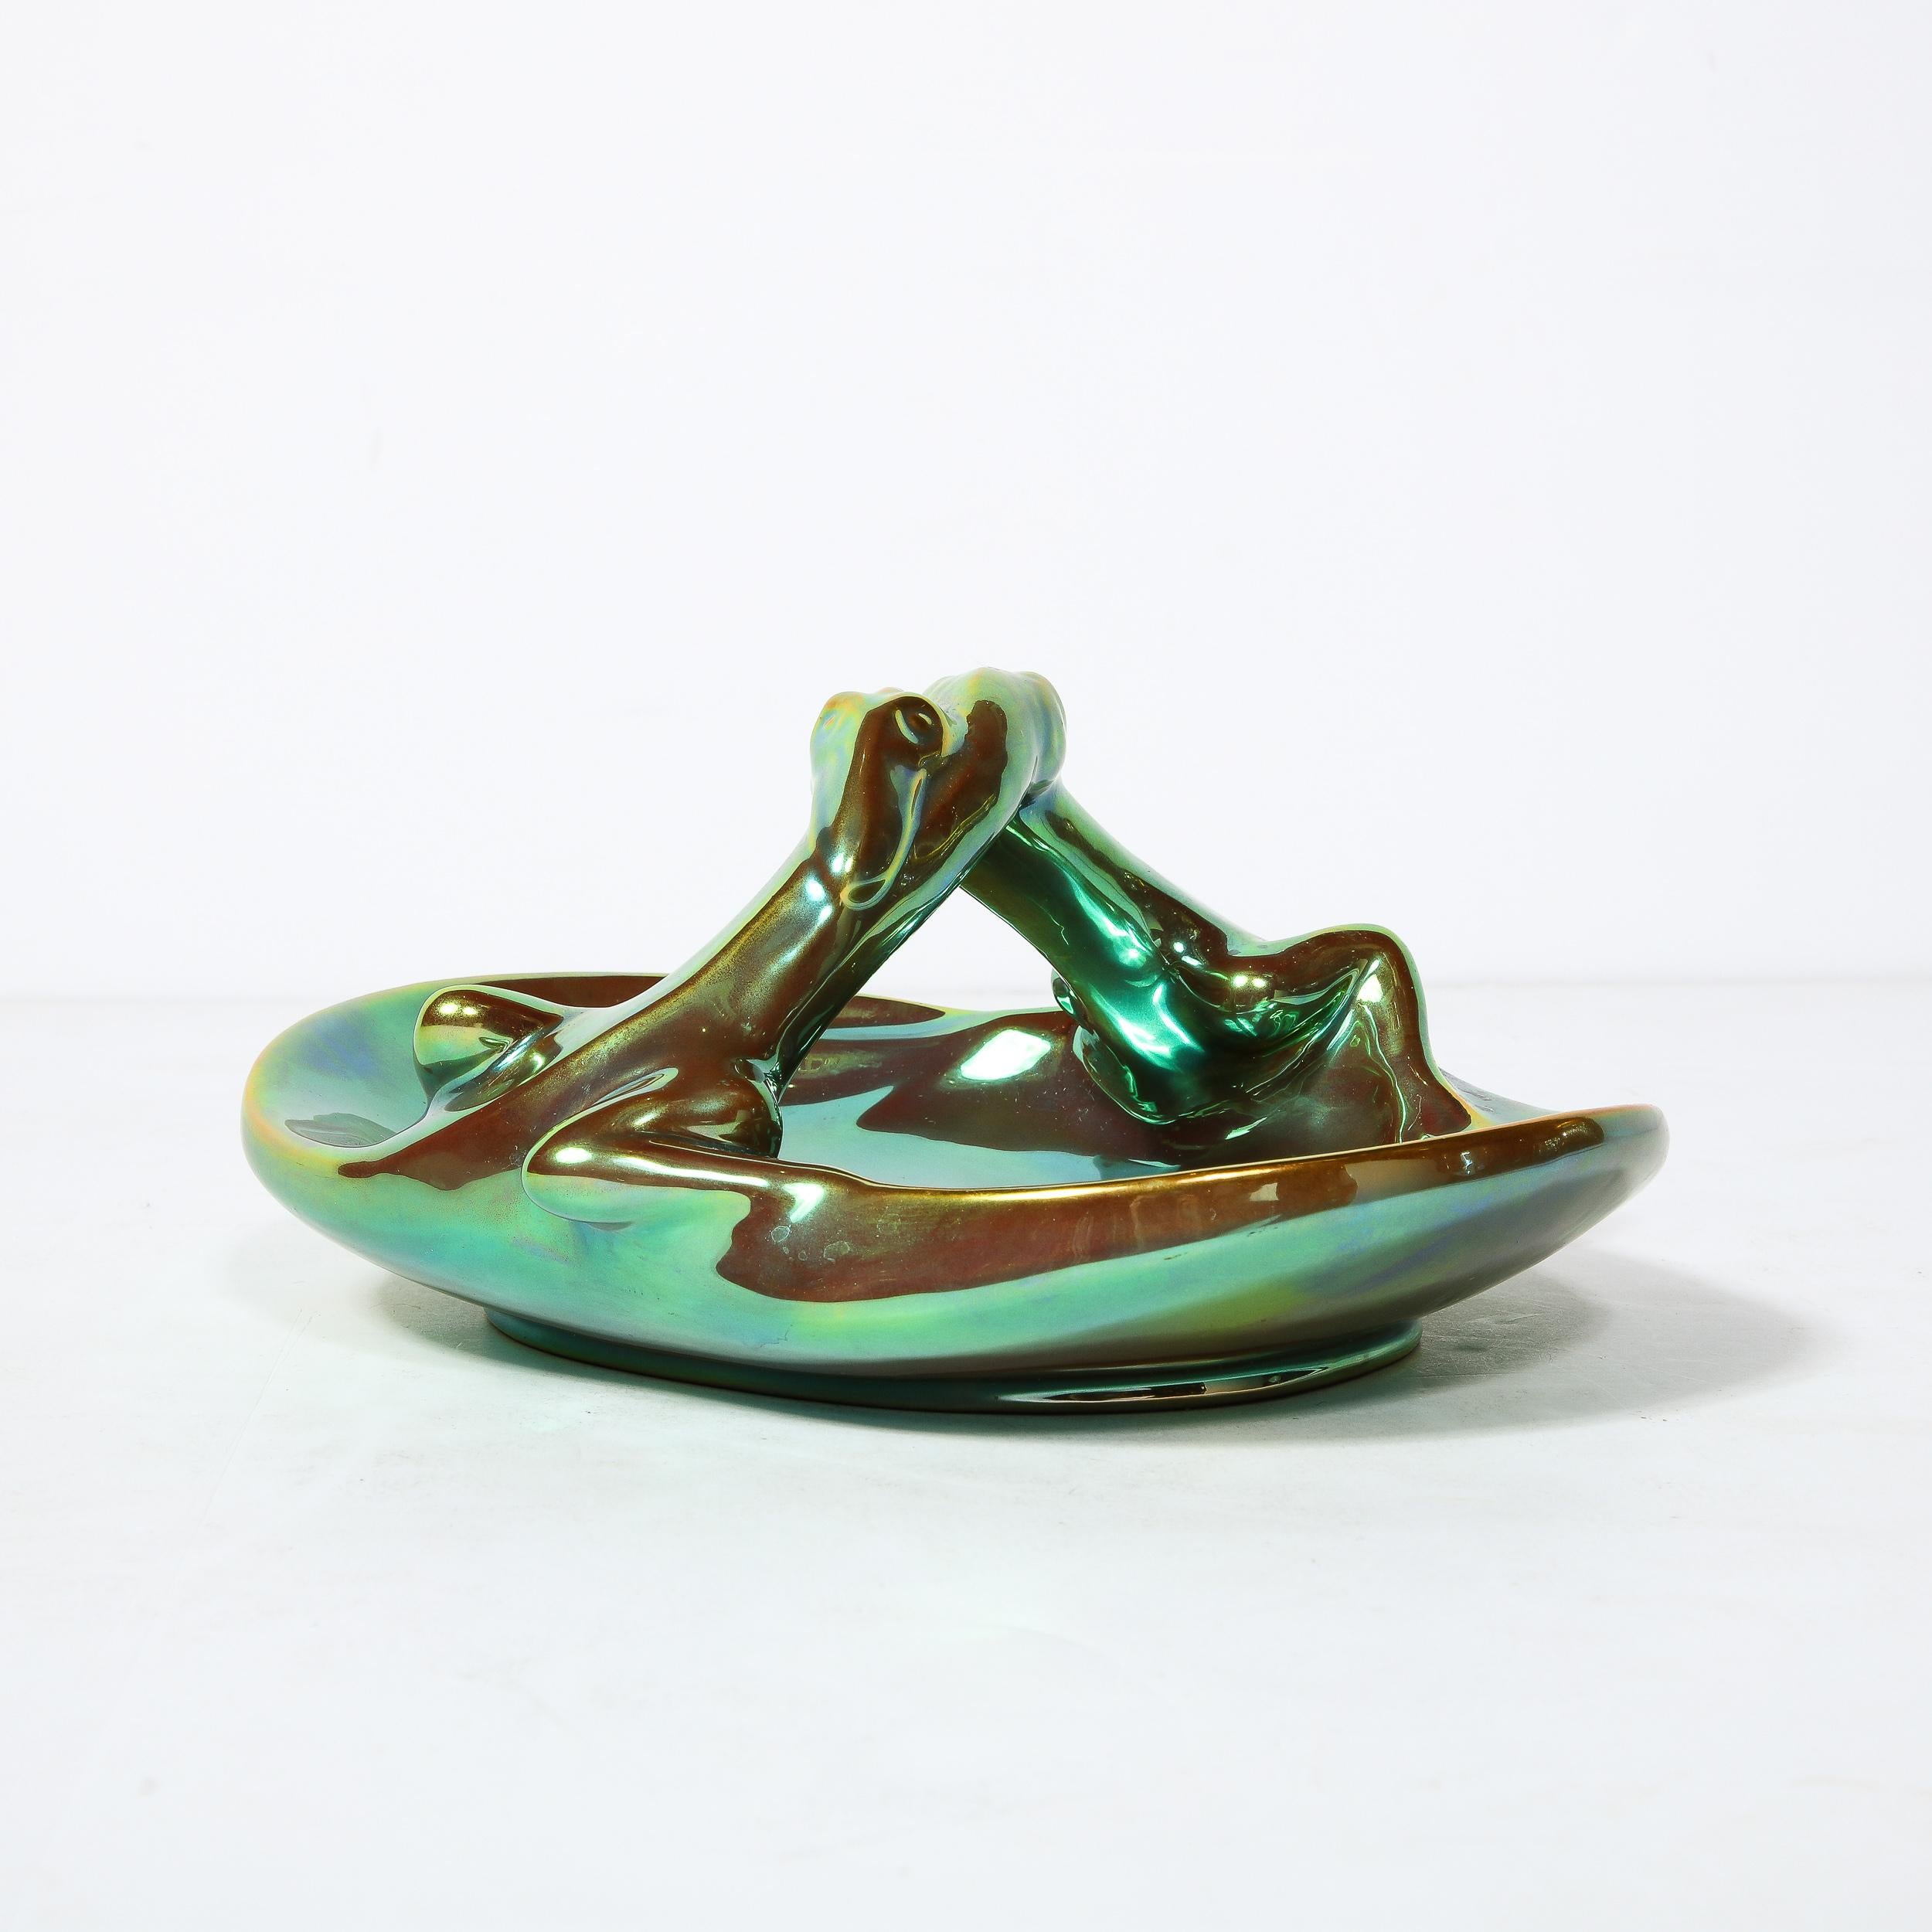 Art Deco Basket Form Ceramic Dish of Entwined Lizards by Zsolnay Eosin For Sale 8